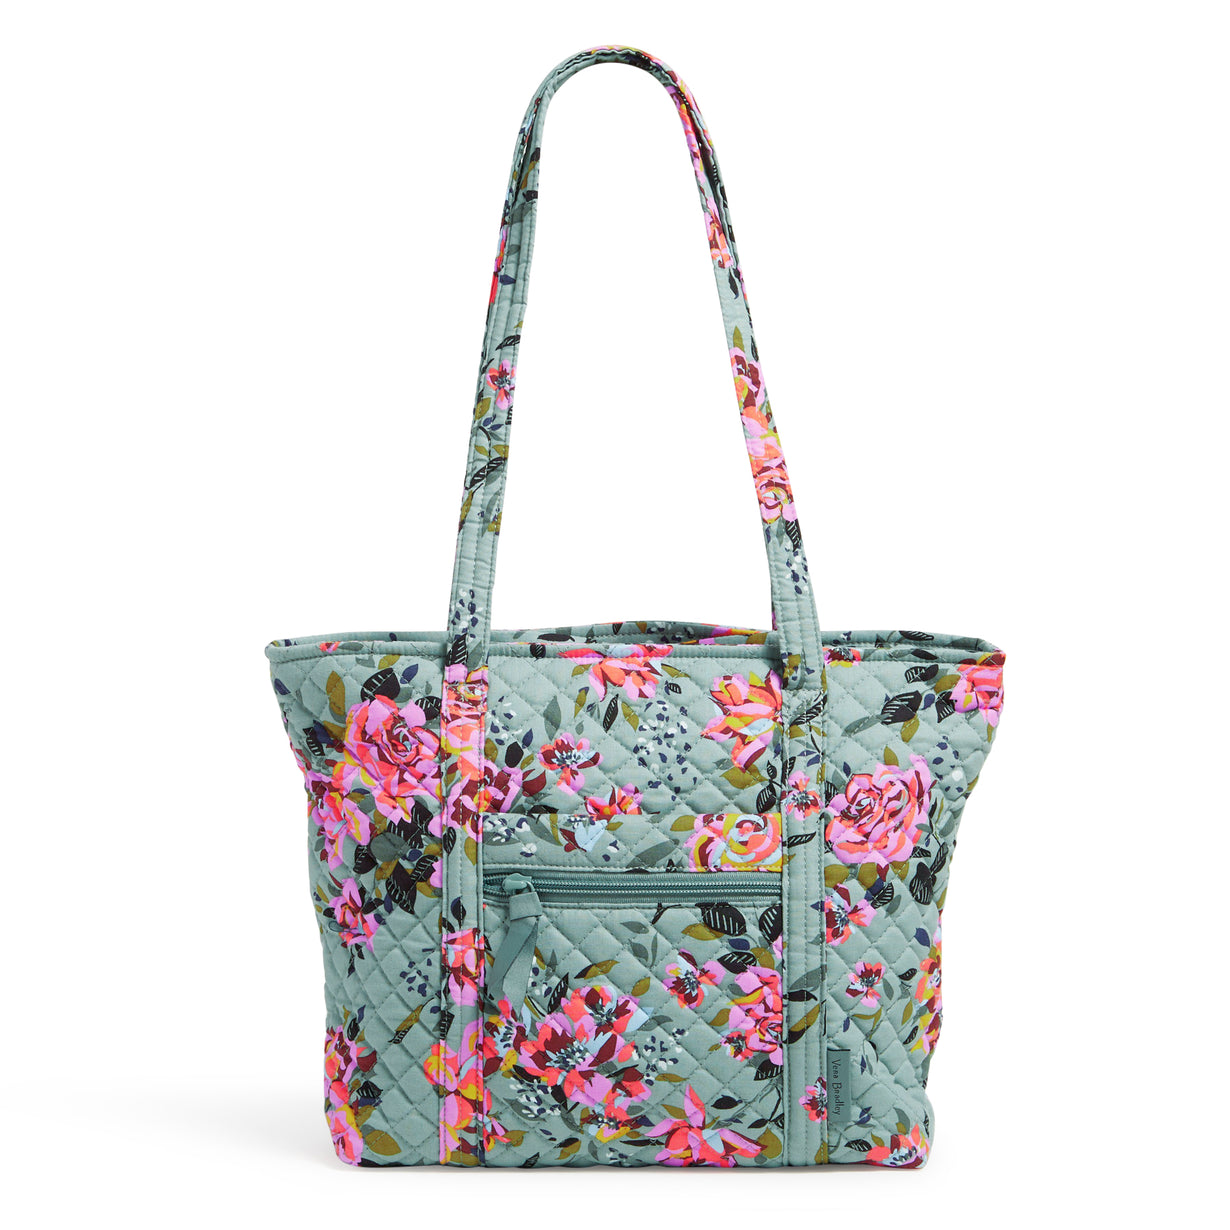 Vera Bradley Small Tote Bag In Rosy Outlook Pattern